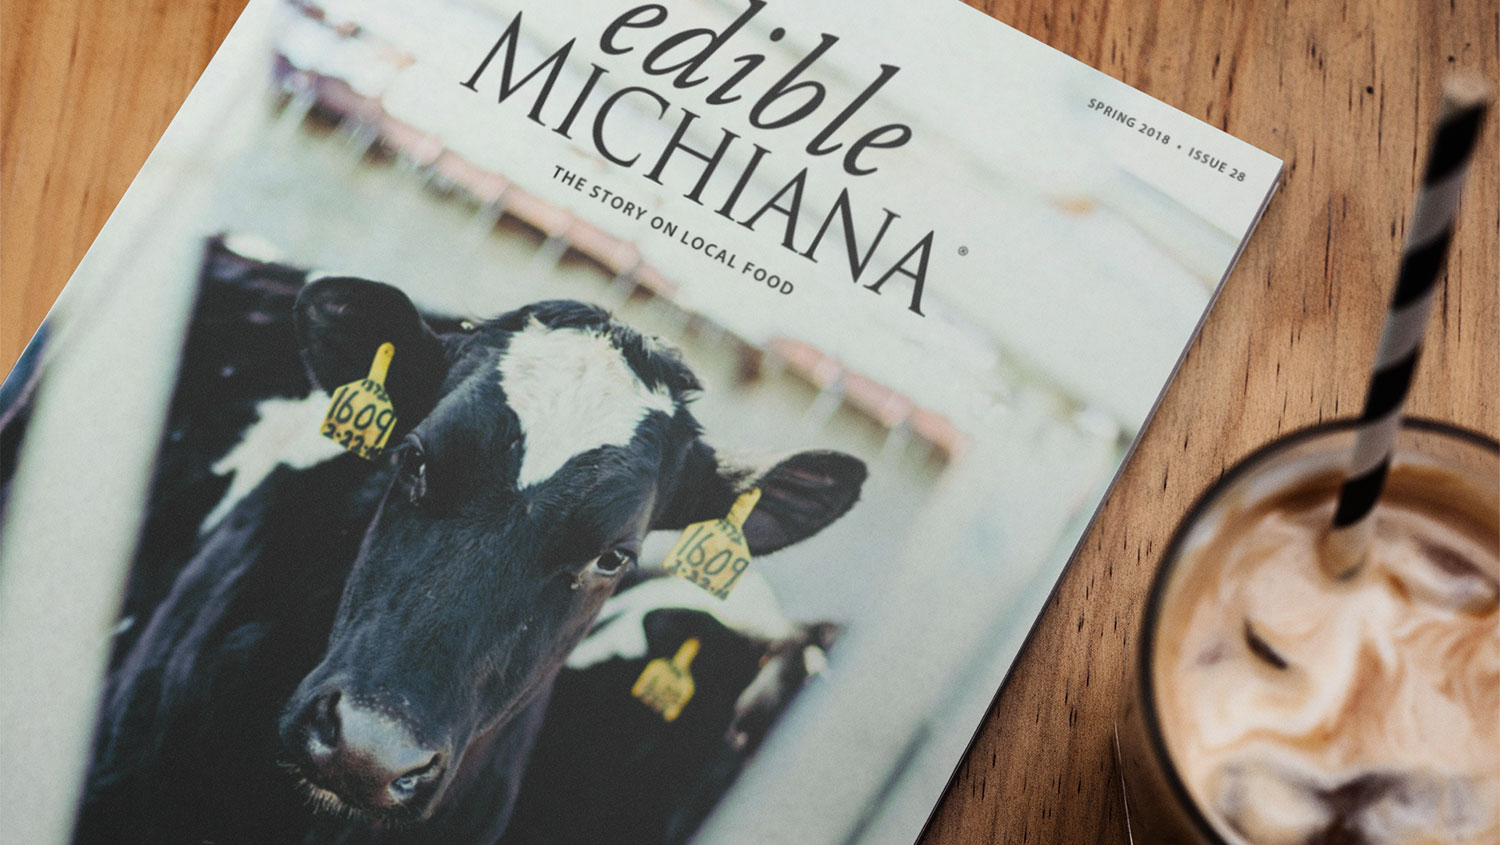 Edible Michiana archive issues